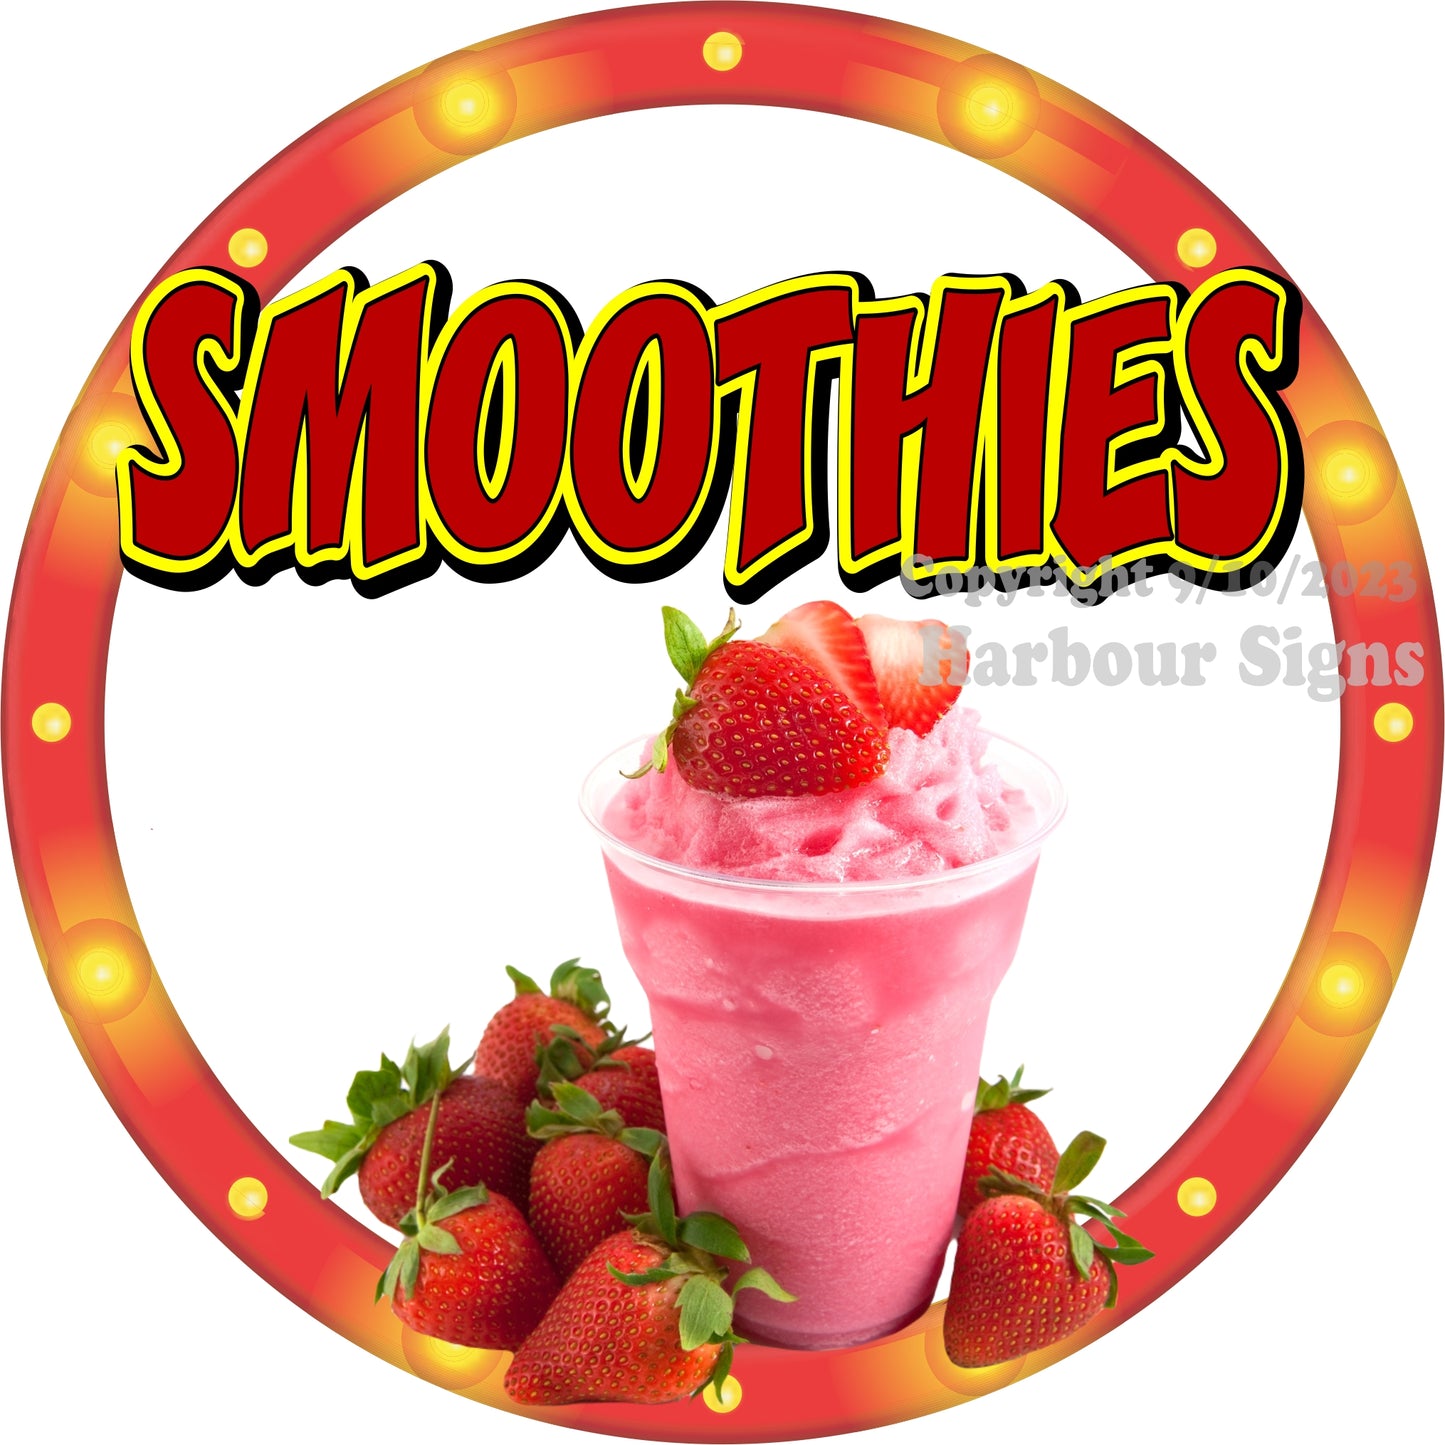 Smoothies Decal Food Truck Concession Vinyl Sticker